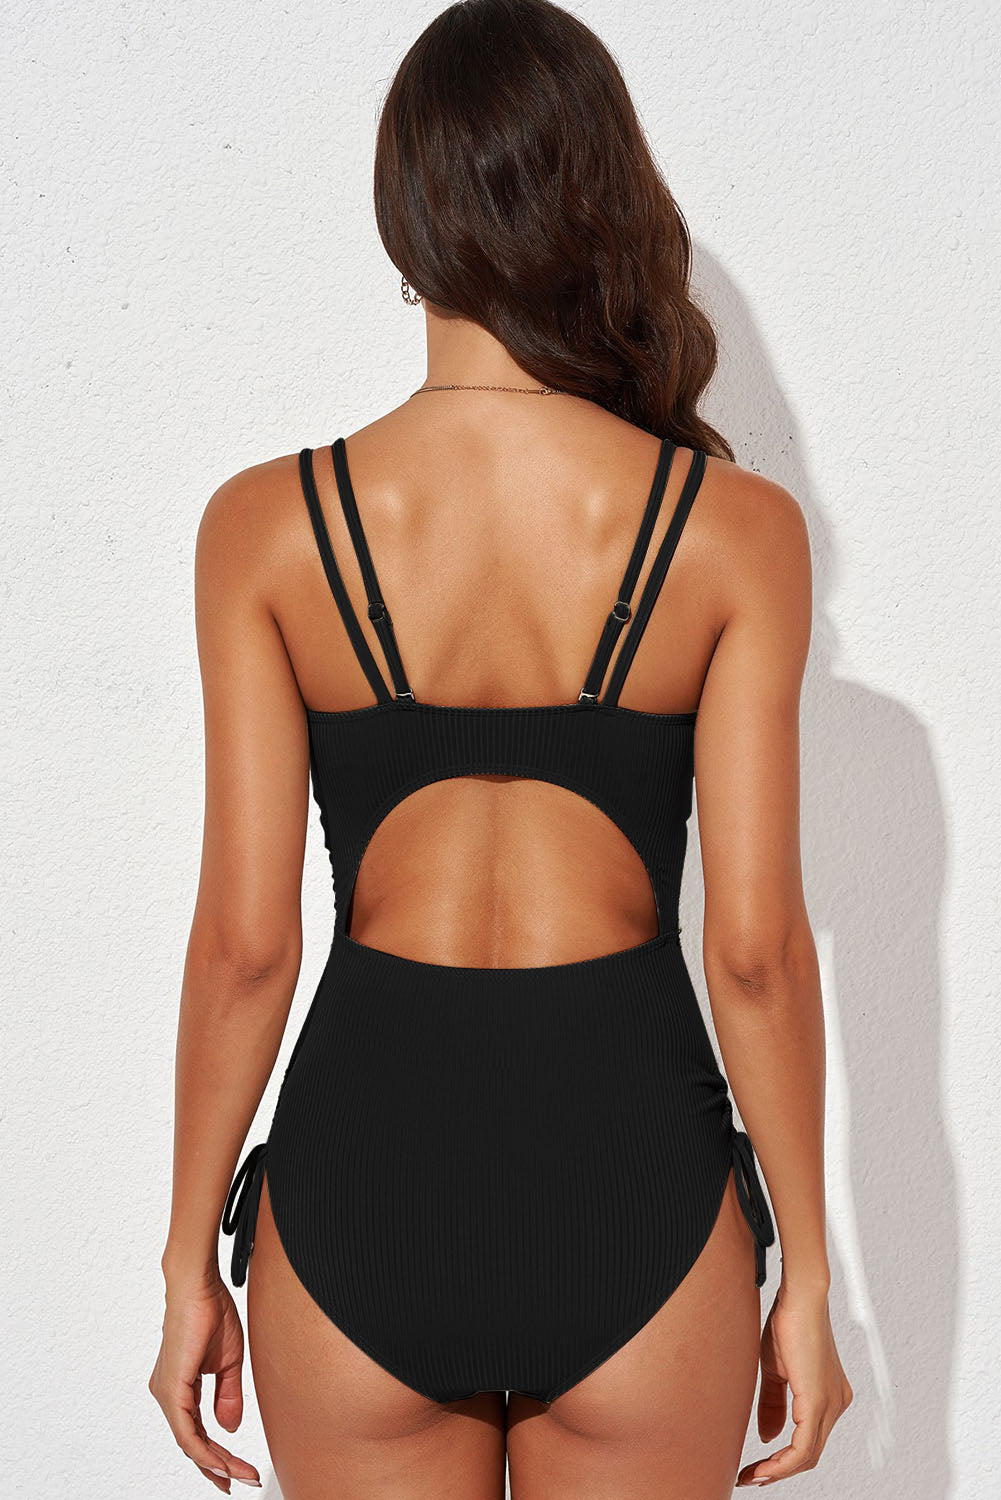 Tied Cutout Plunge One-Piece Swimsuit - Women’s Clothing & Accessories - Swimwear - 18 - 2024